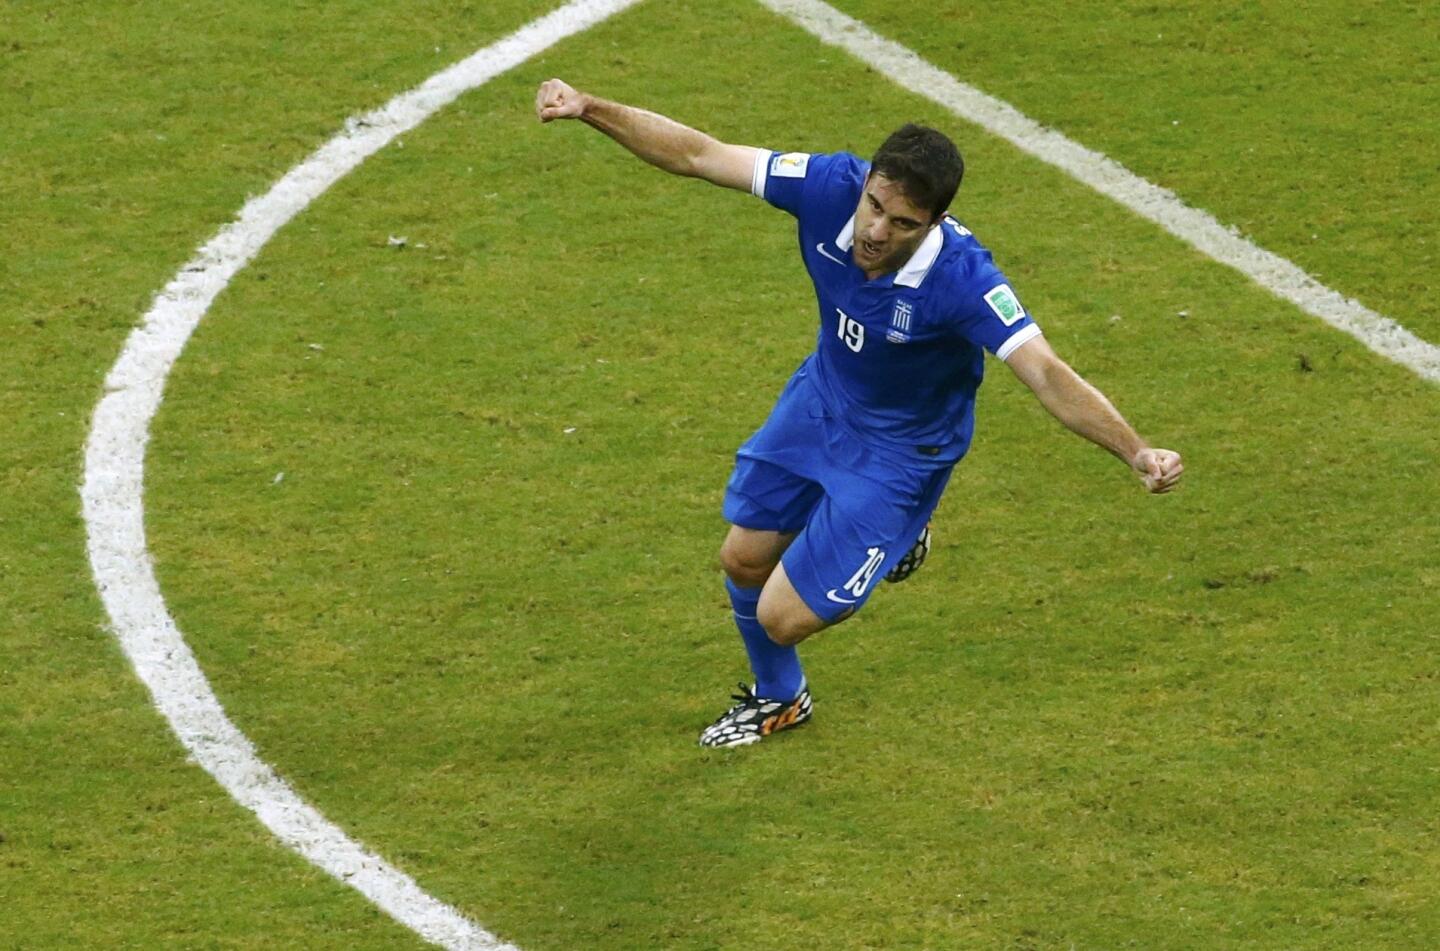 Greece's Sokratis Papastathopoulos celebrates after scoring a goal during the 2014 World Cup round of 16 game between Costa Rica and Greece at the Pernambuco arena